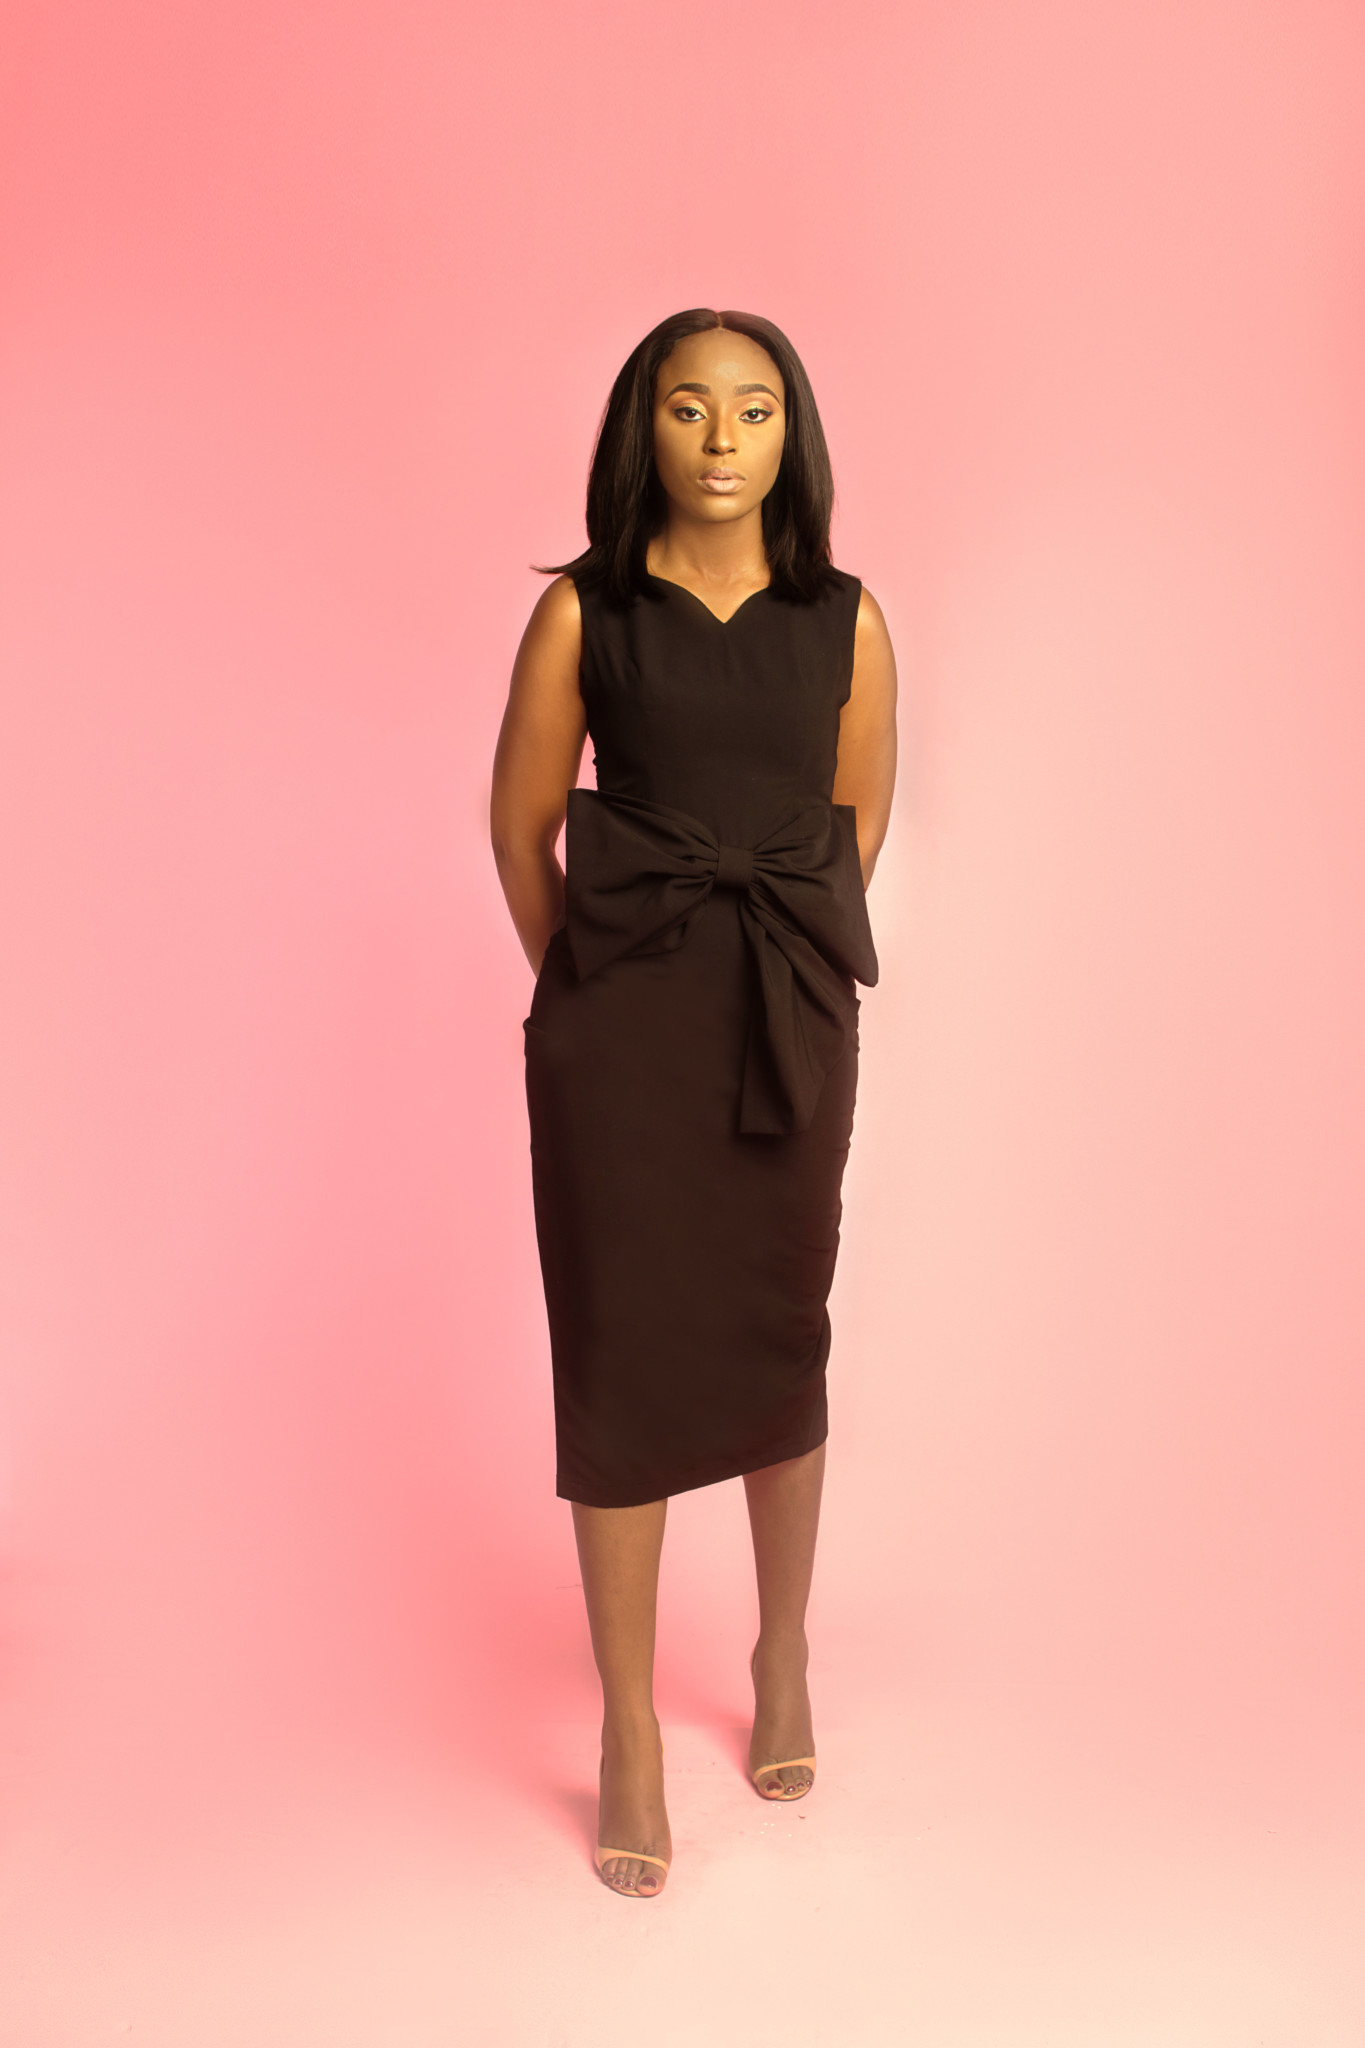 Fashion House Rabesque releases the Rebirth Collection Lookbook (6)